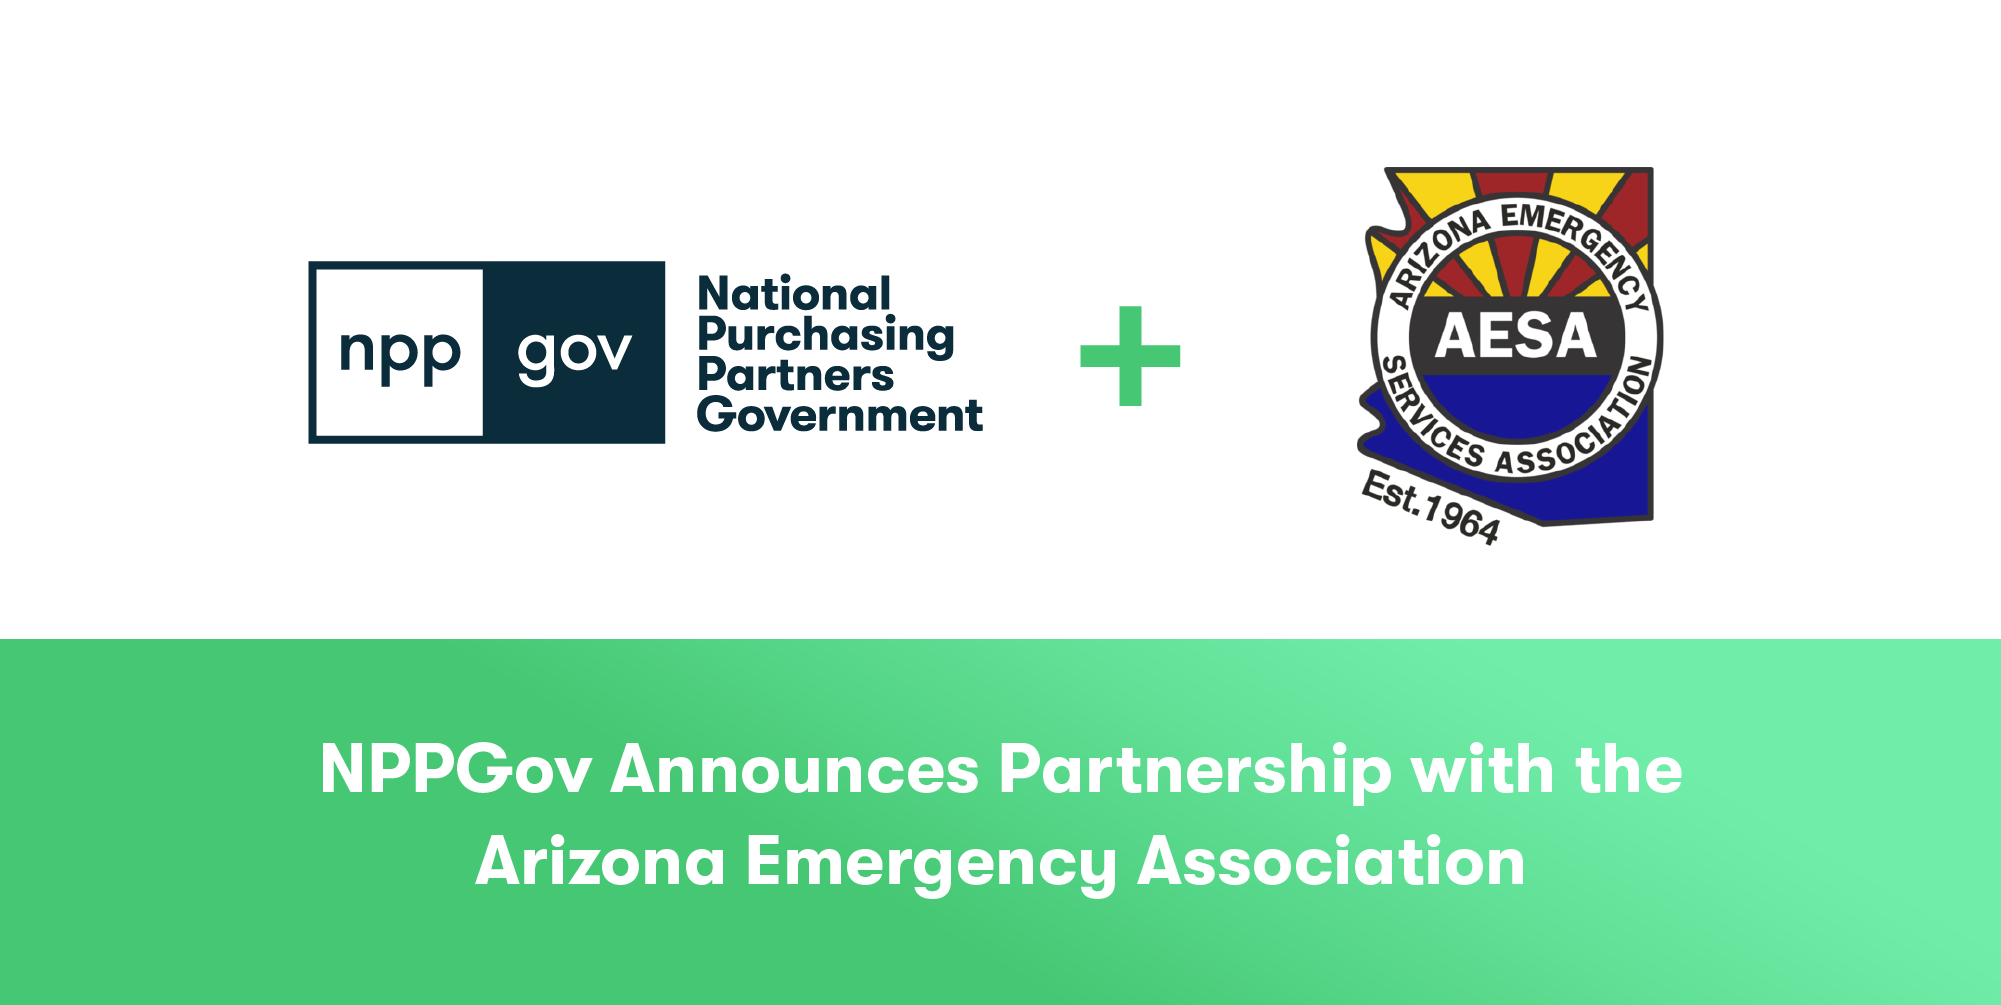 NPPGov Public Safety GPO Partners with the Arizona Emergency Services Association